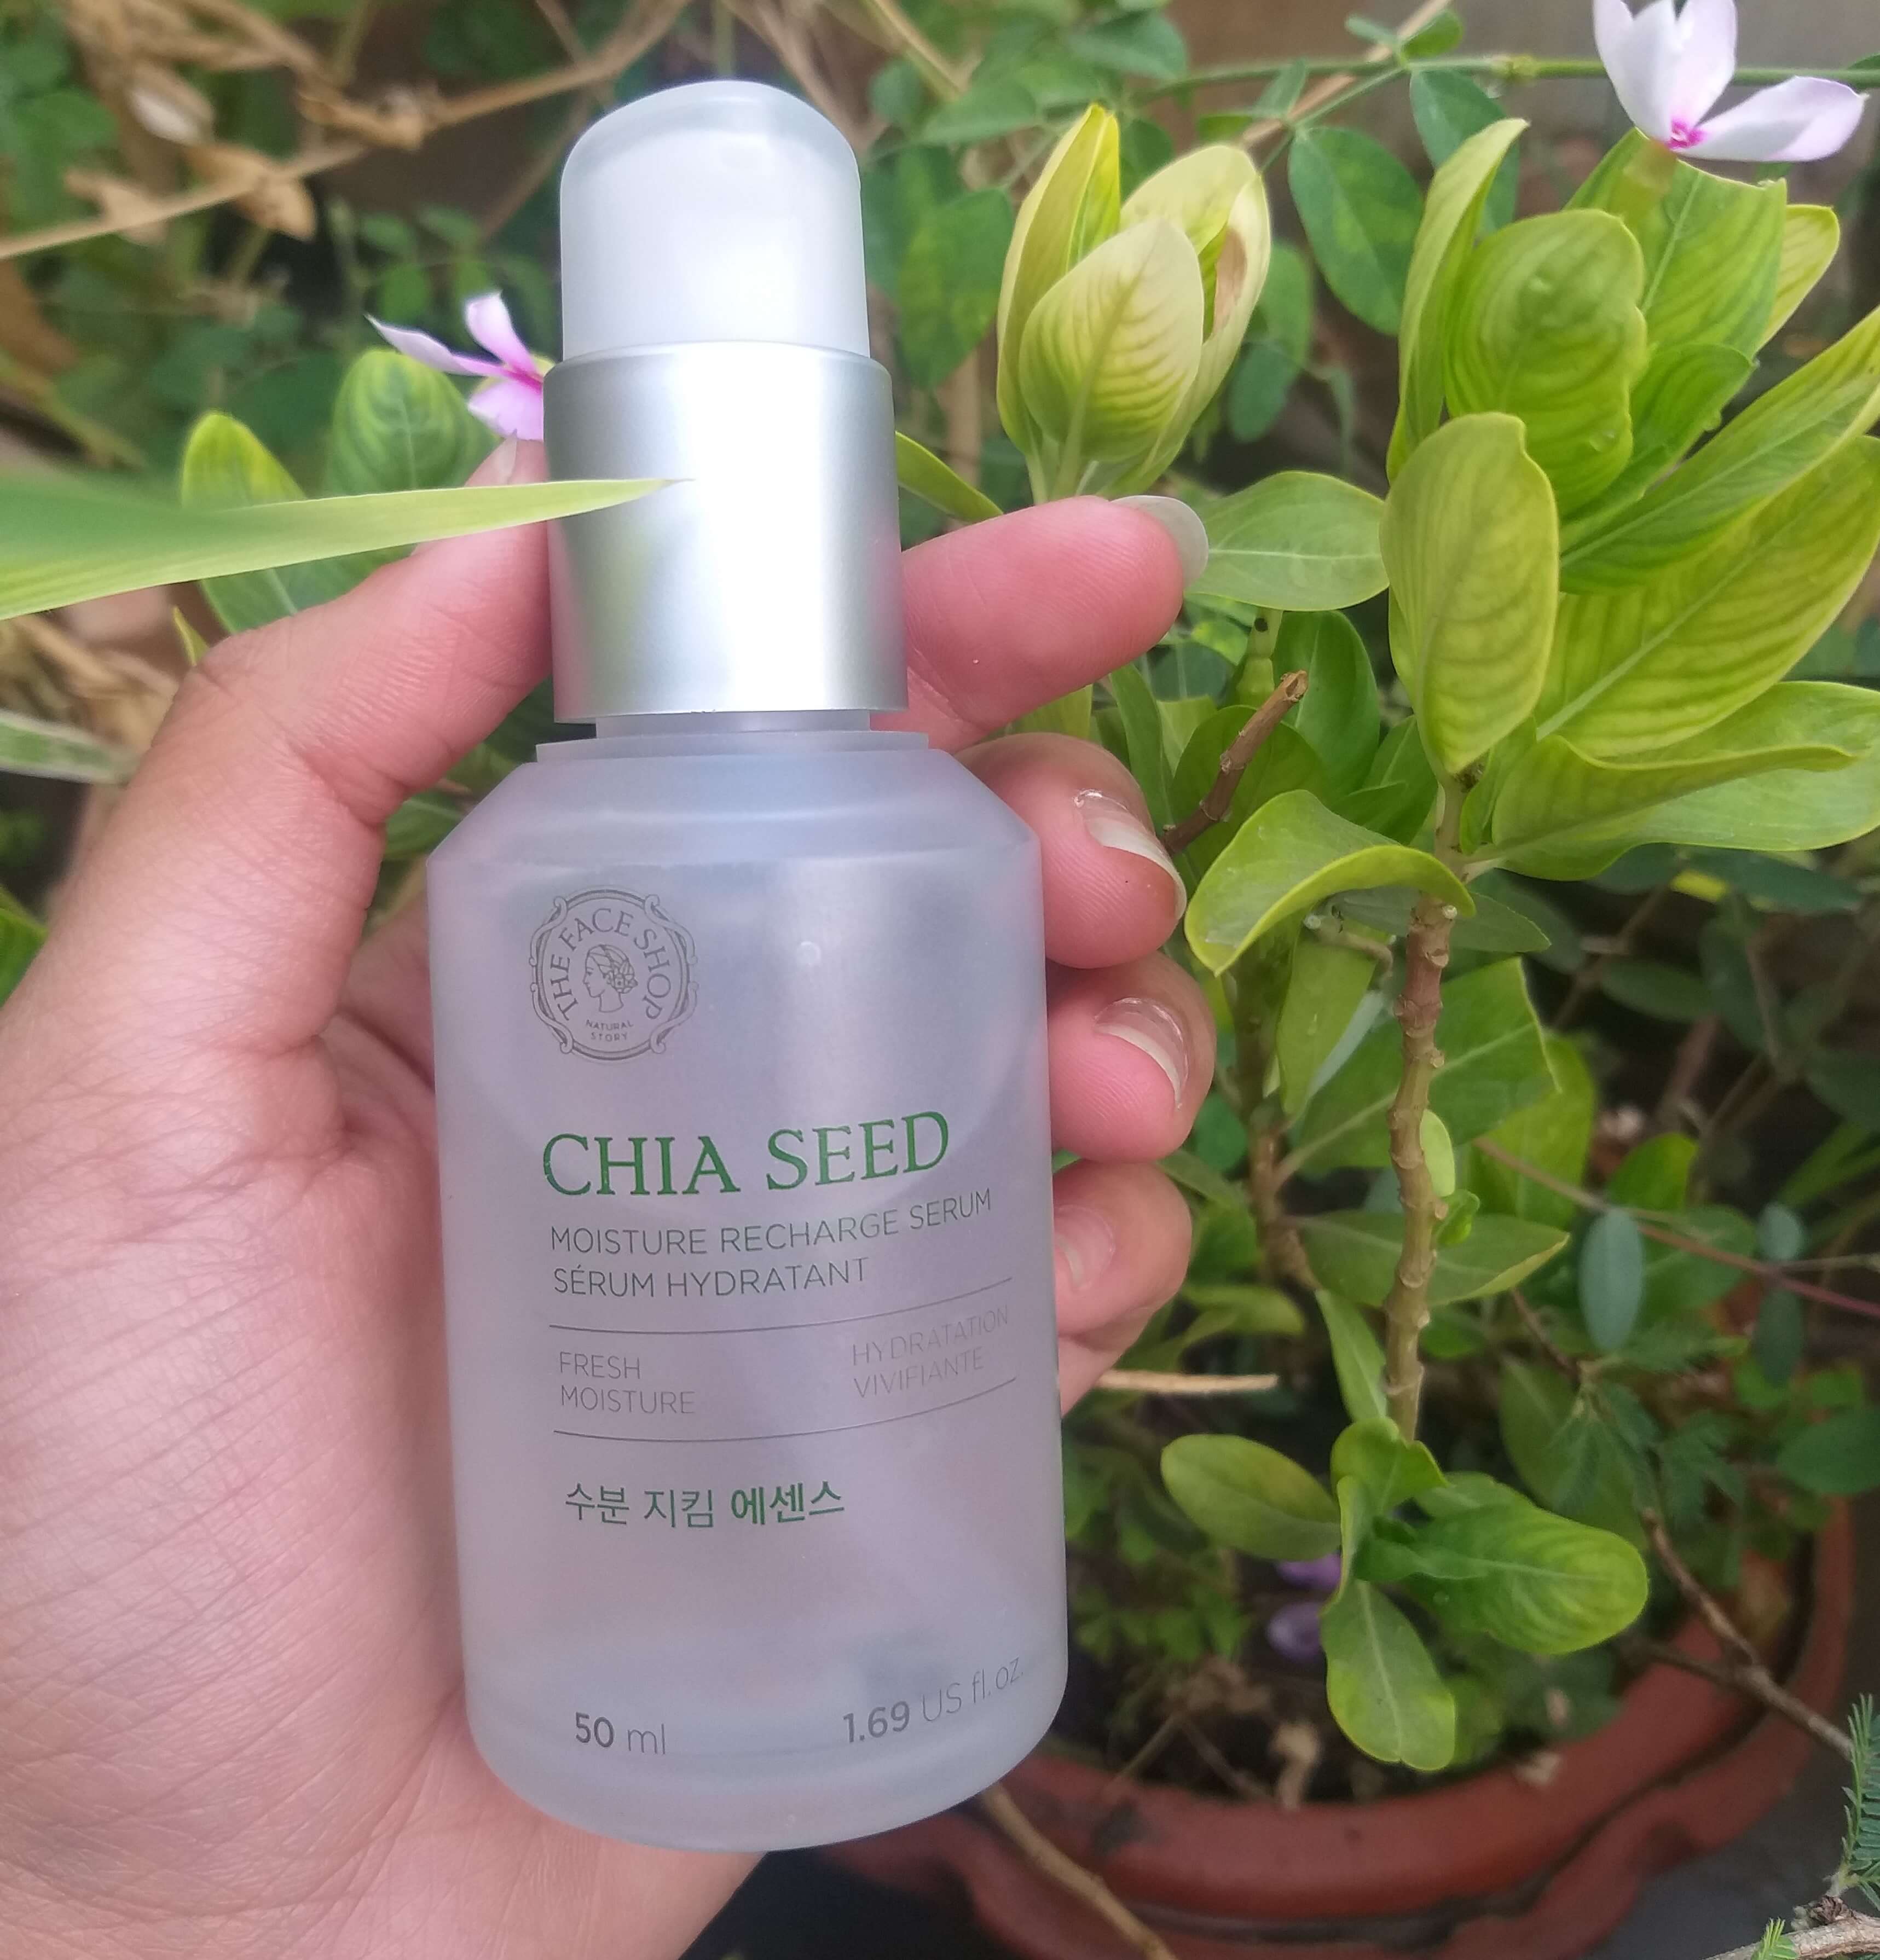 The Face Shop Chia Seed Moisture Recharge Serum